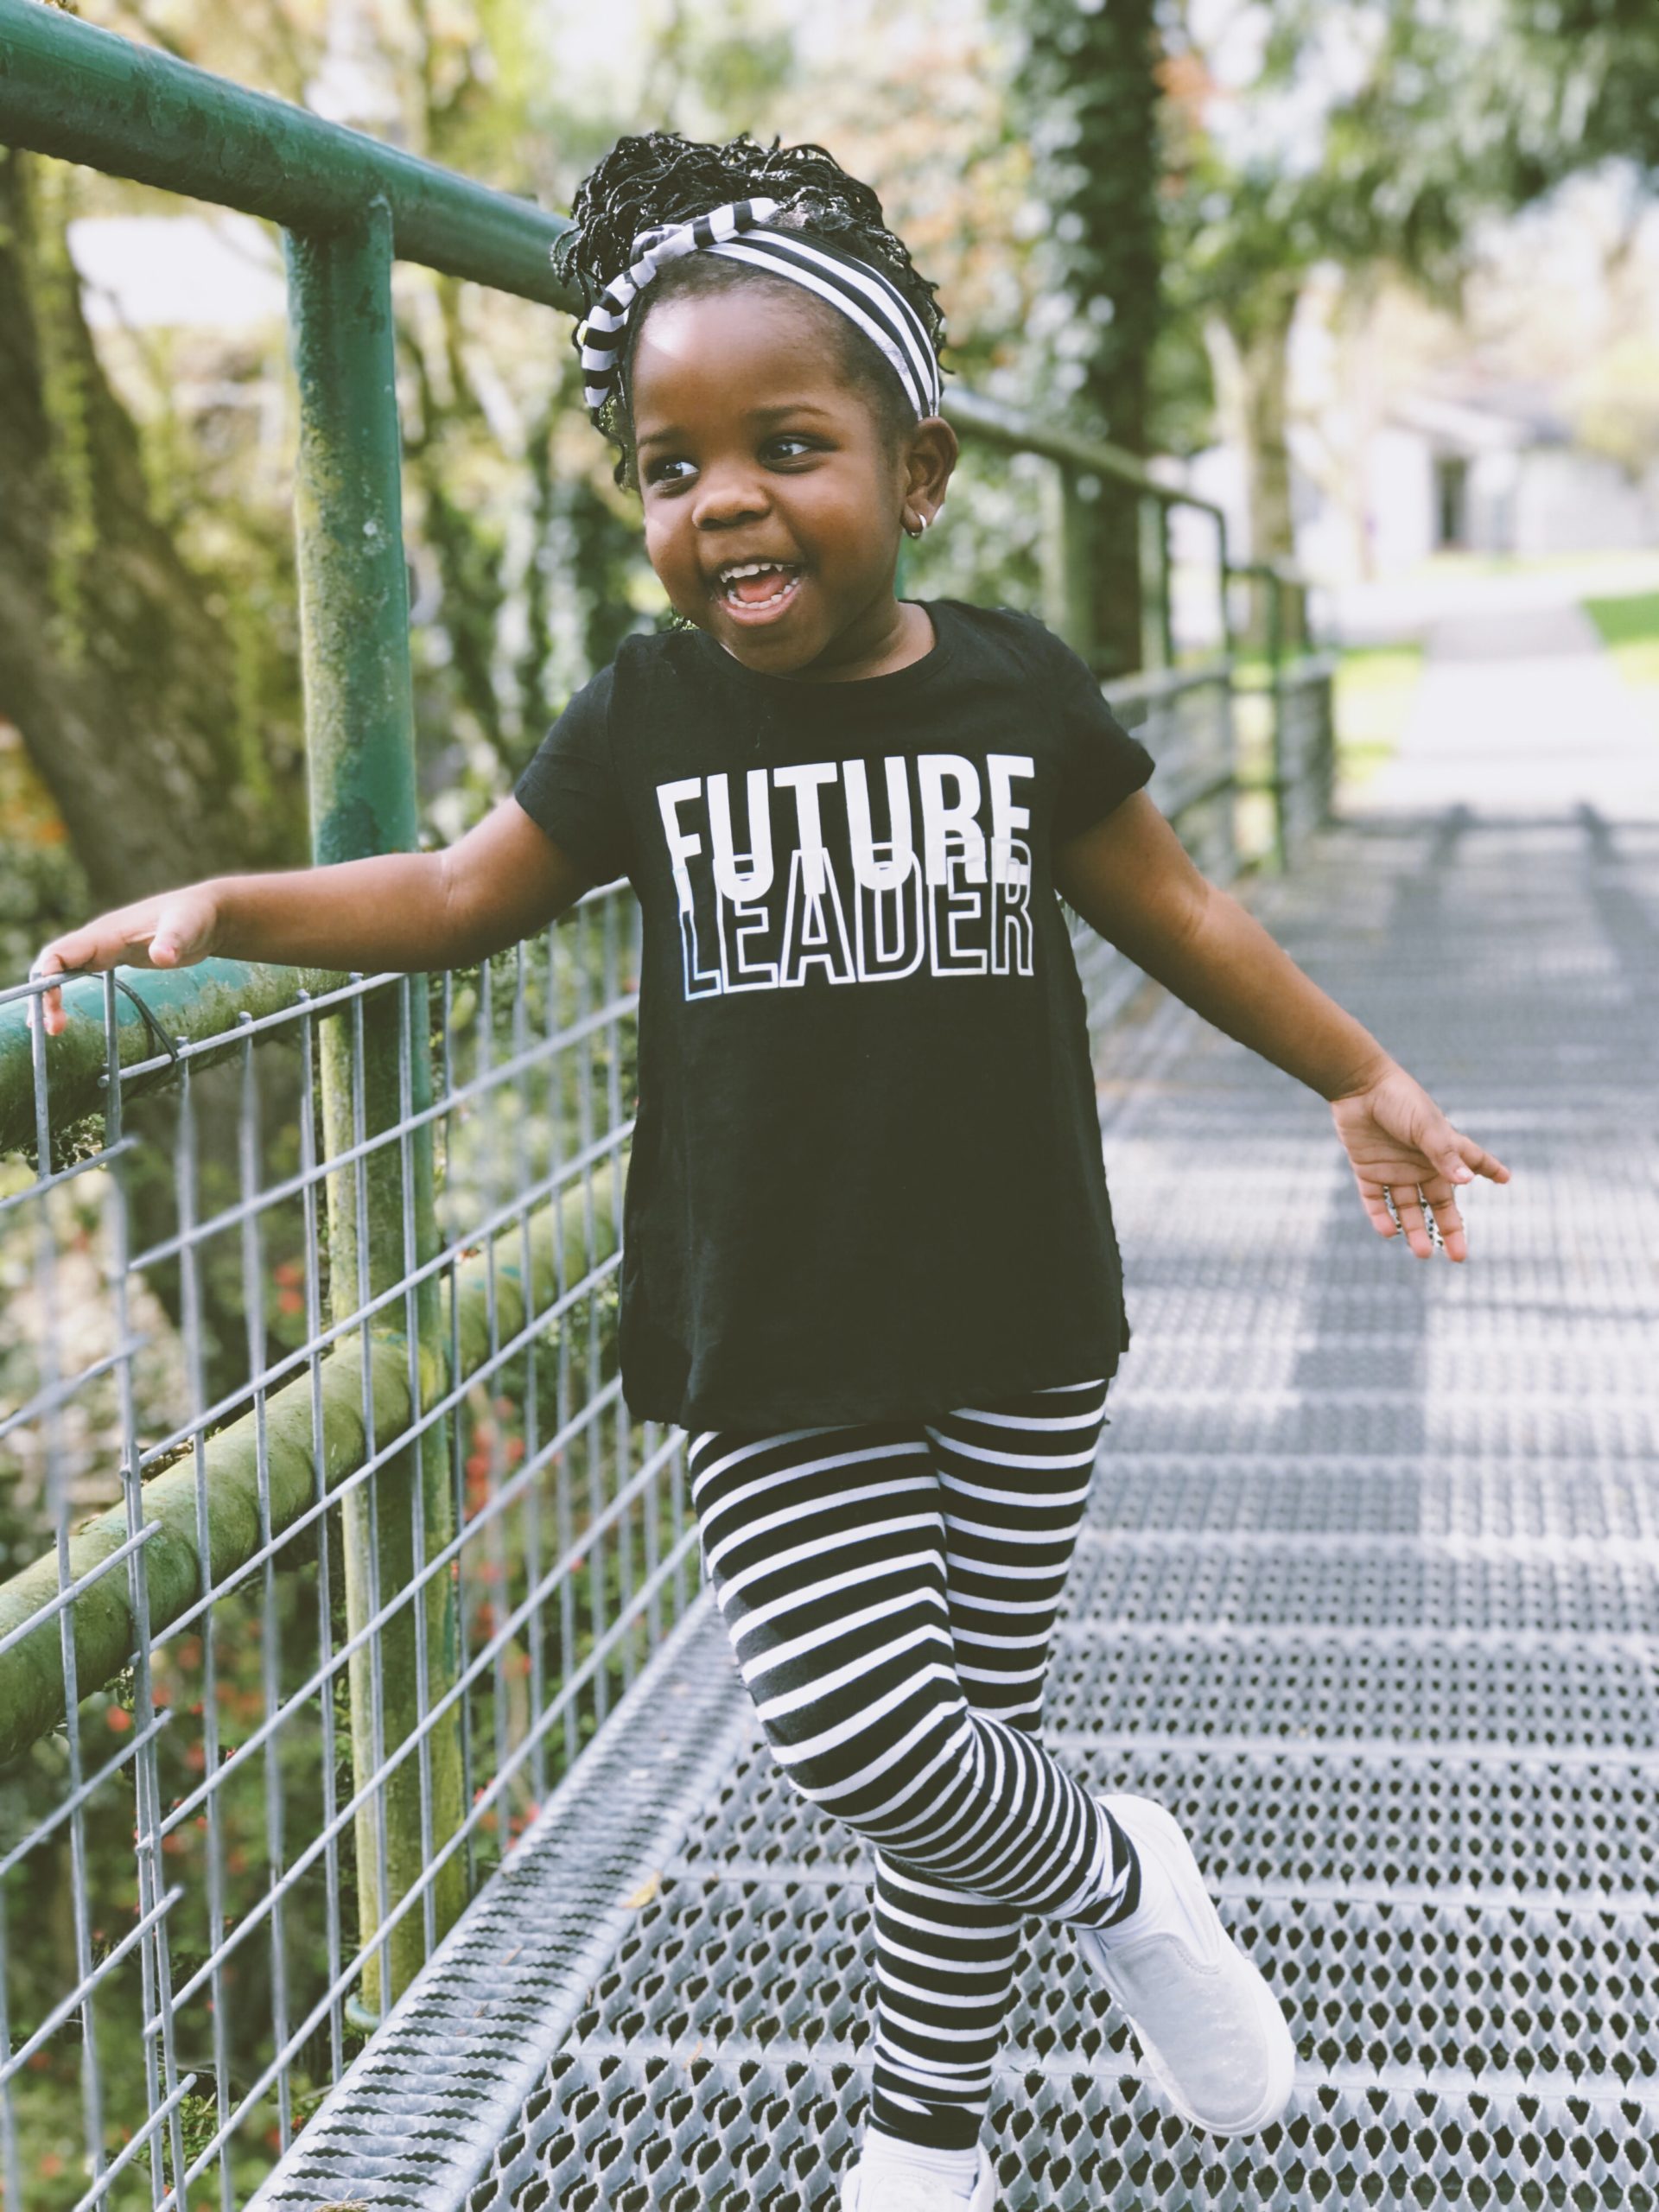 Little girl standing on bridge smiling & wearing a black t-shirt that reads Future Leader